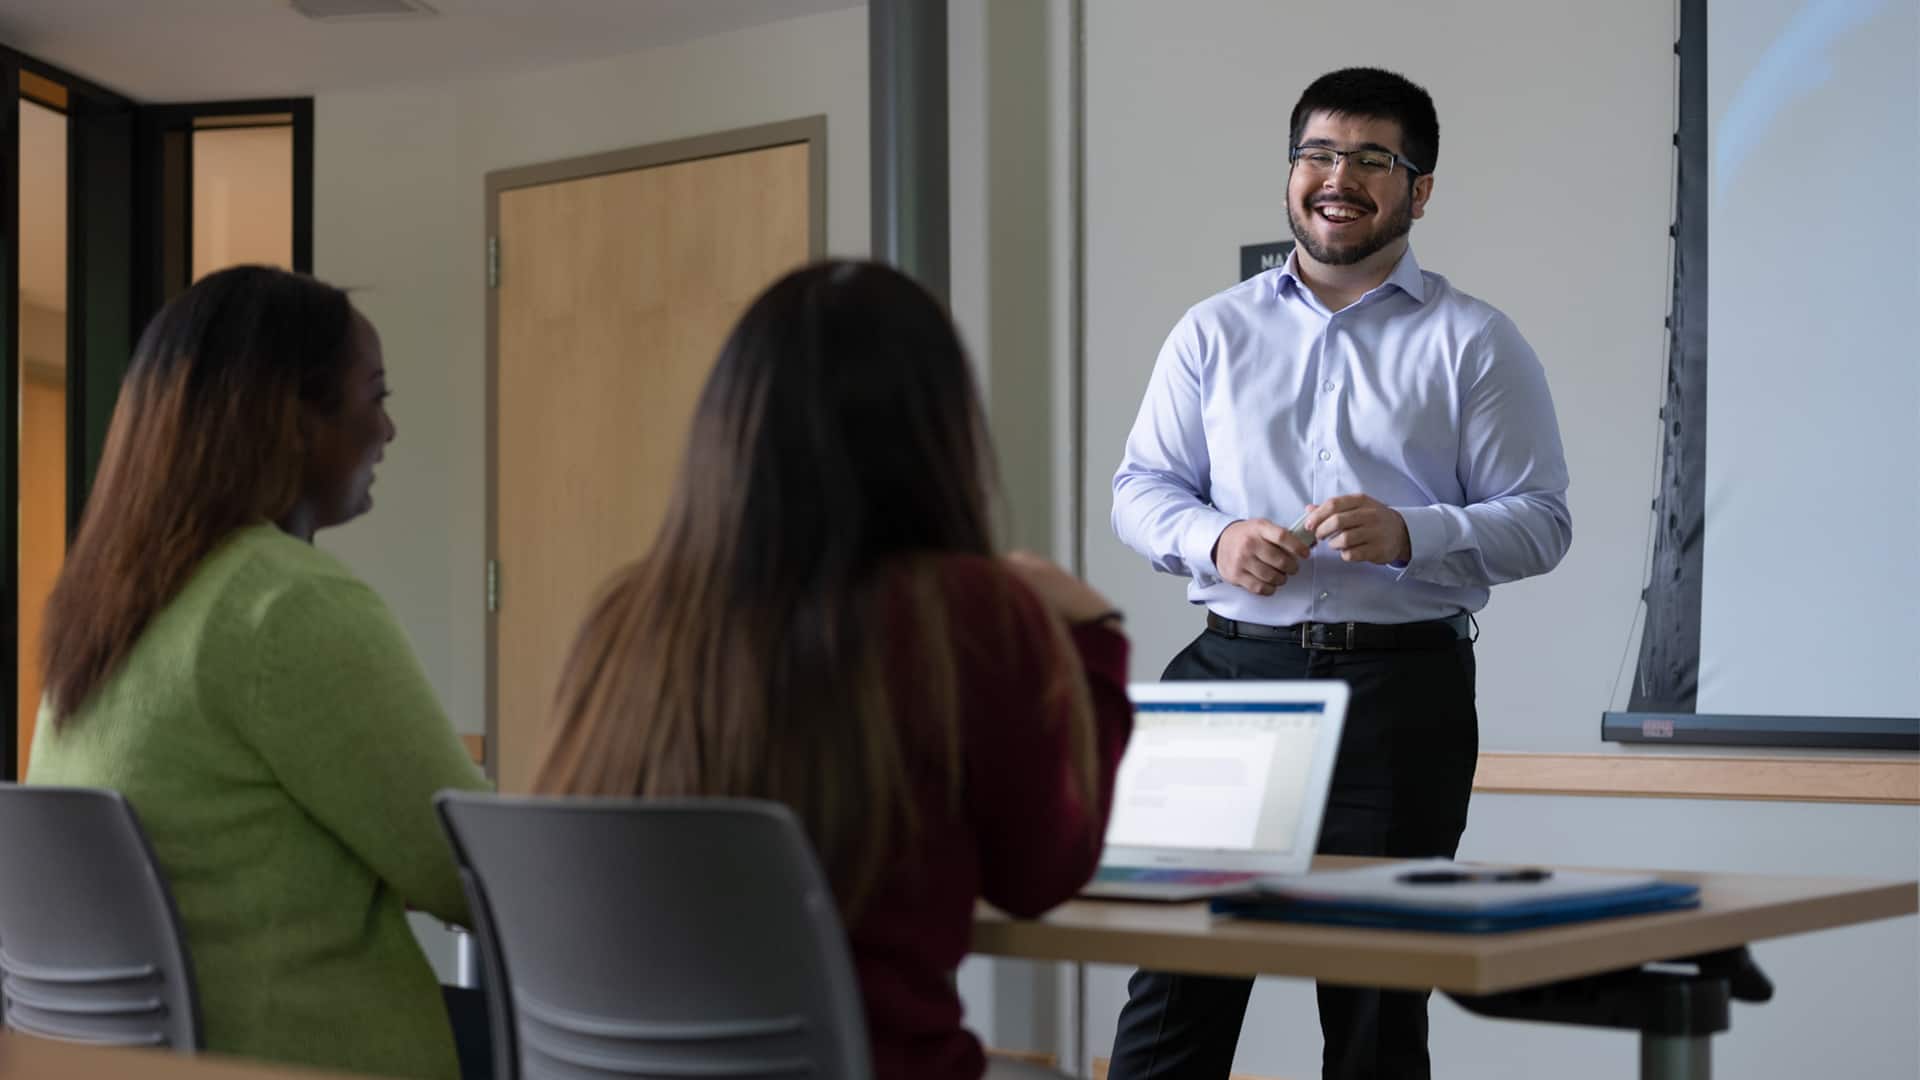 Sultan Ahktar, who earned his degree from SNHU in 2019, standing in front of two women in a classroom.